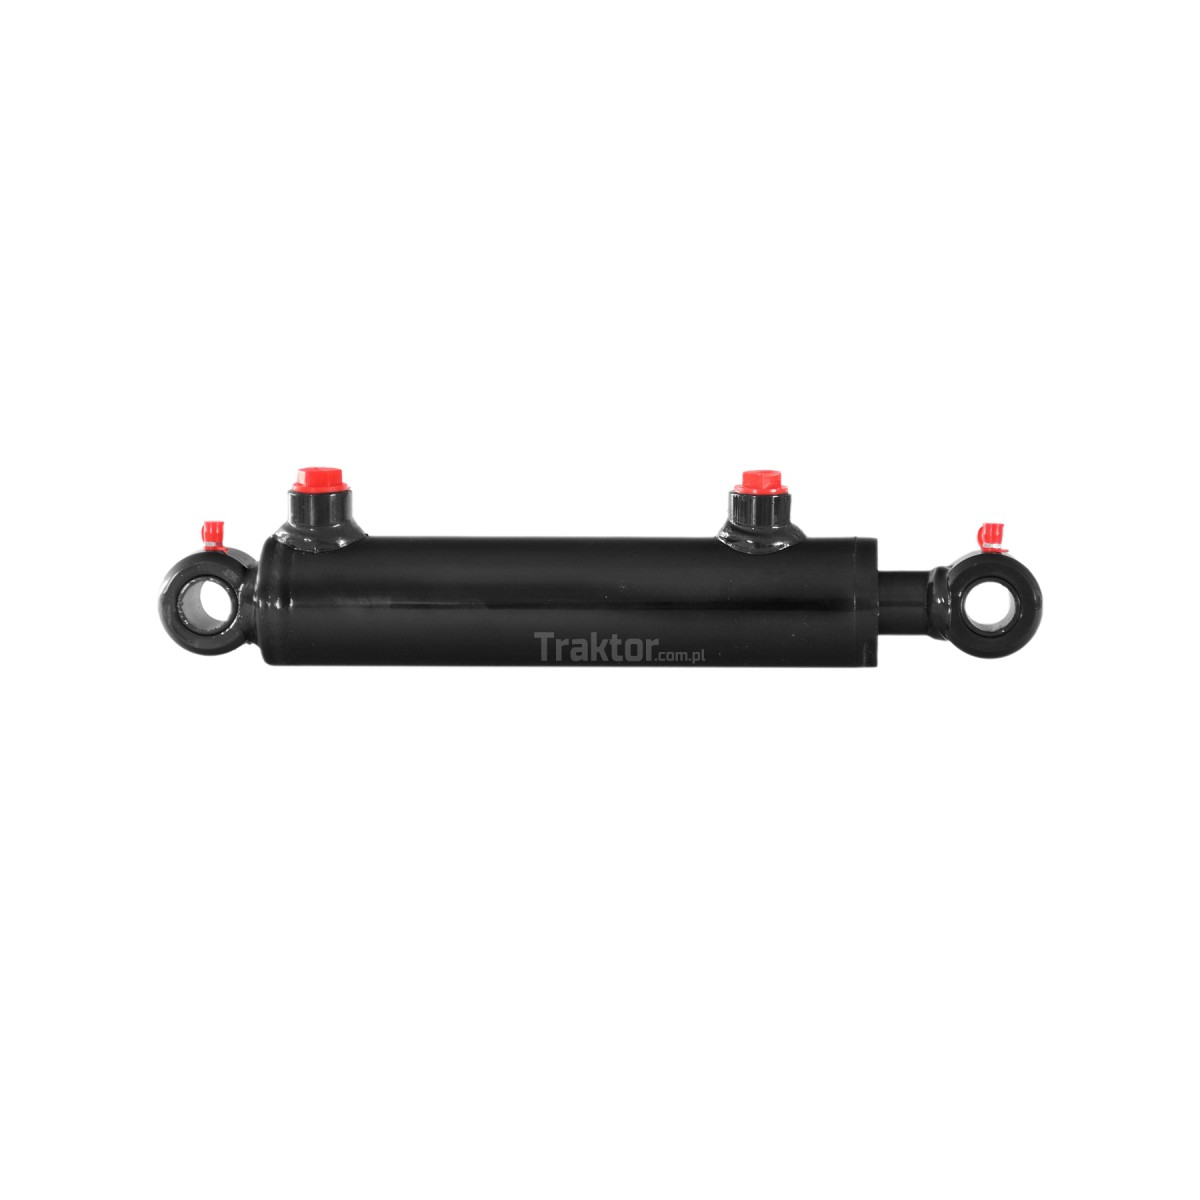 Double-acting Hydraulic Cylinder 135/295/25/50 - black